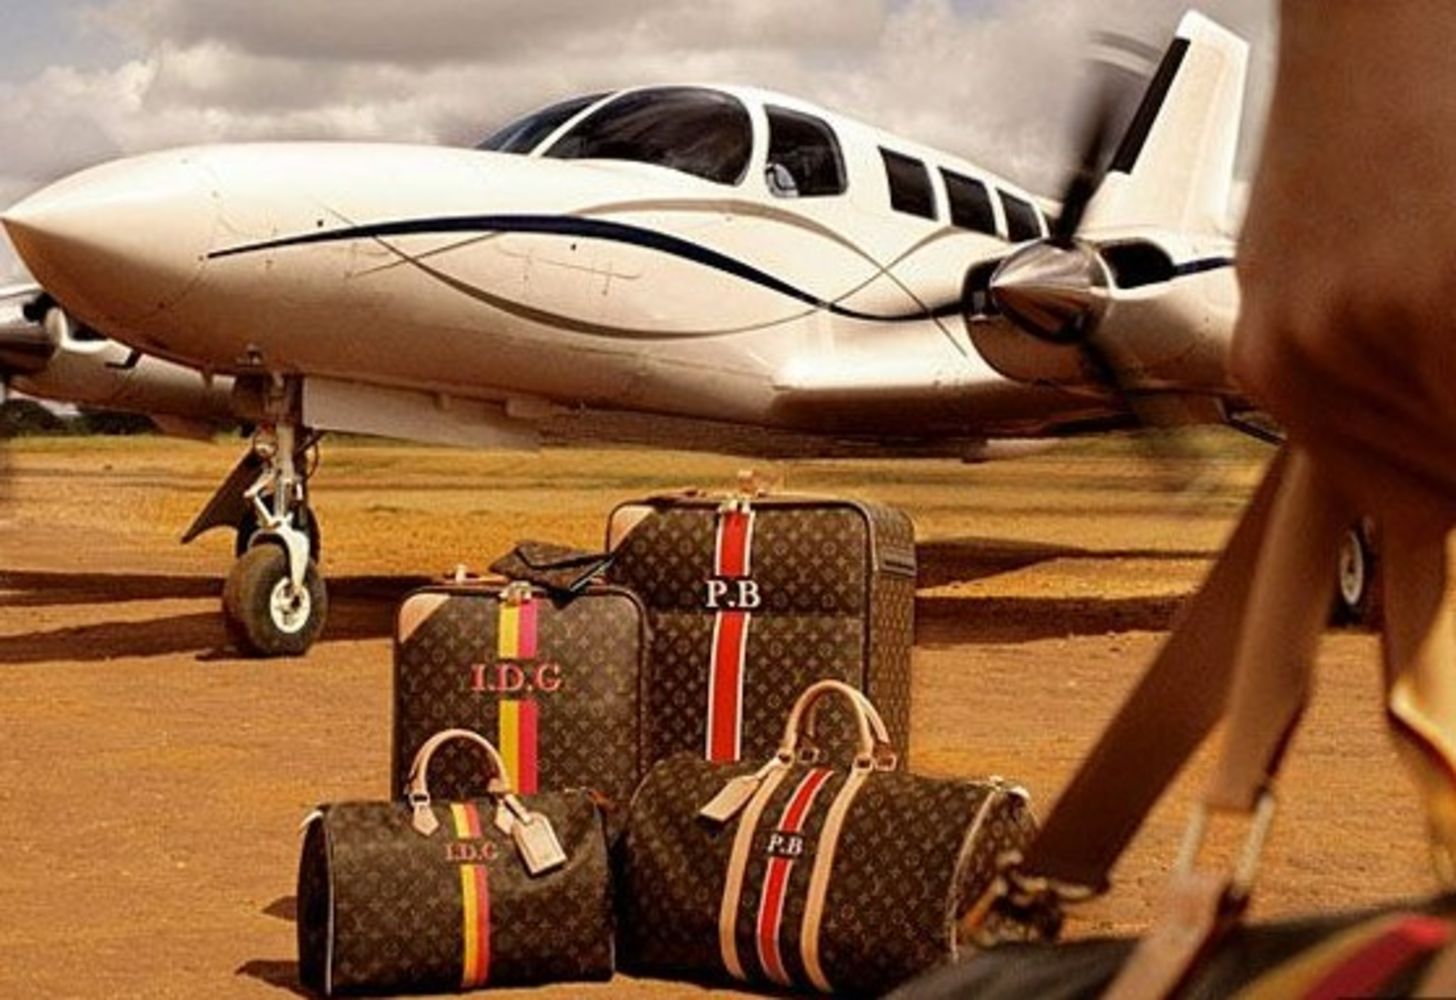 LOST PROPERTY AND AUCTION OF GOODS SOLD ON PRIVATE JETS INCLUDING LUGGAGE, WATCHES, ELECTRONICS AND MORE